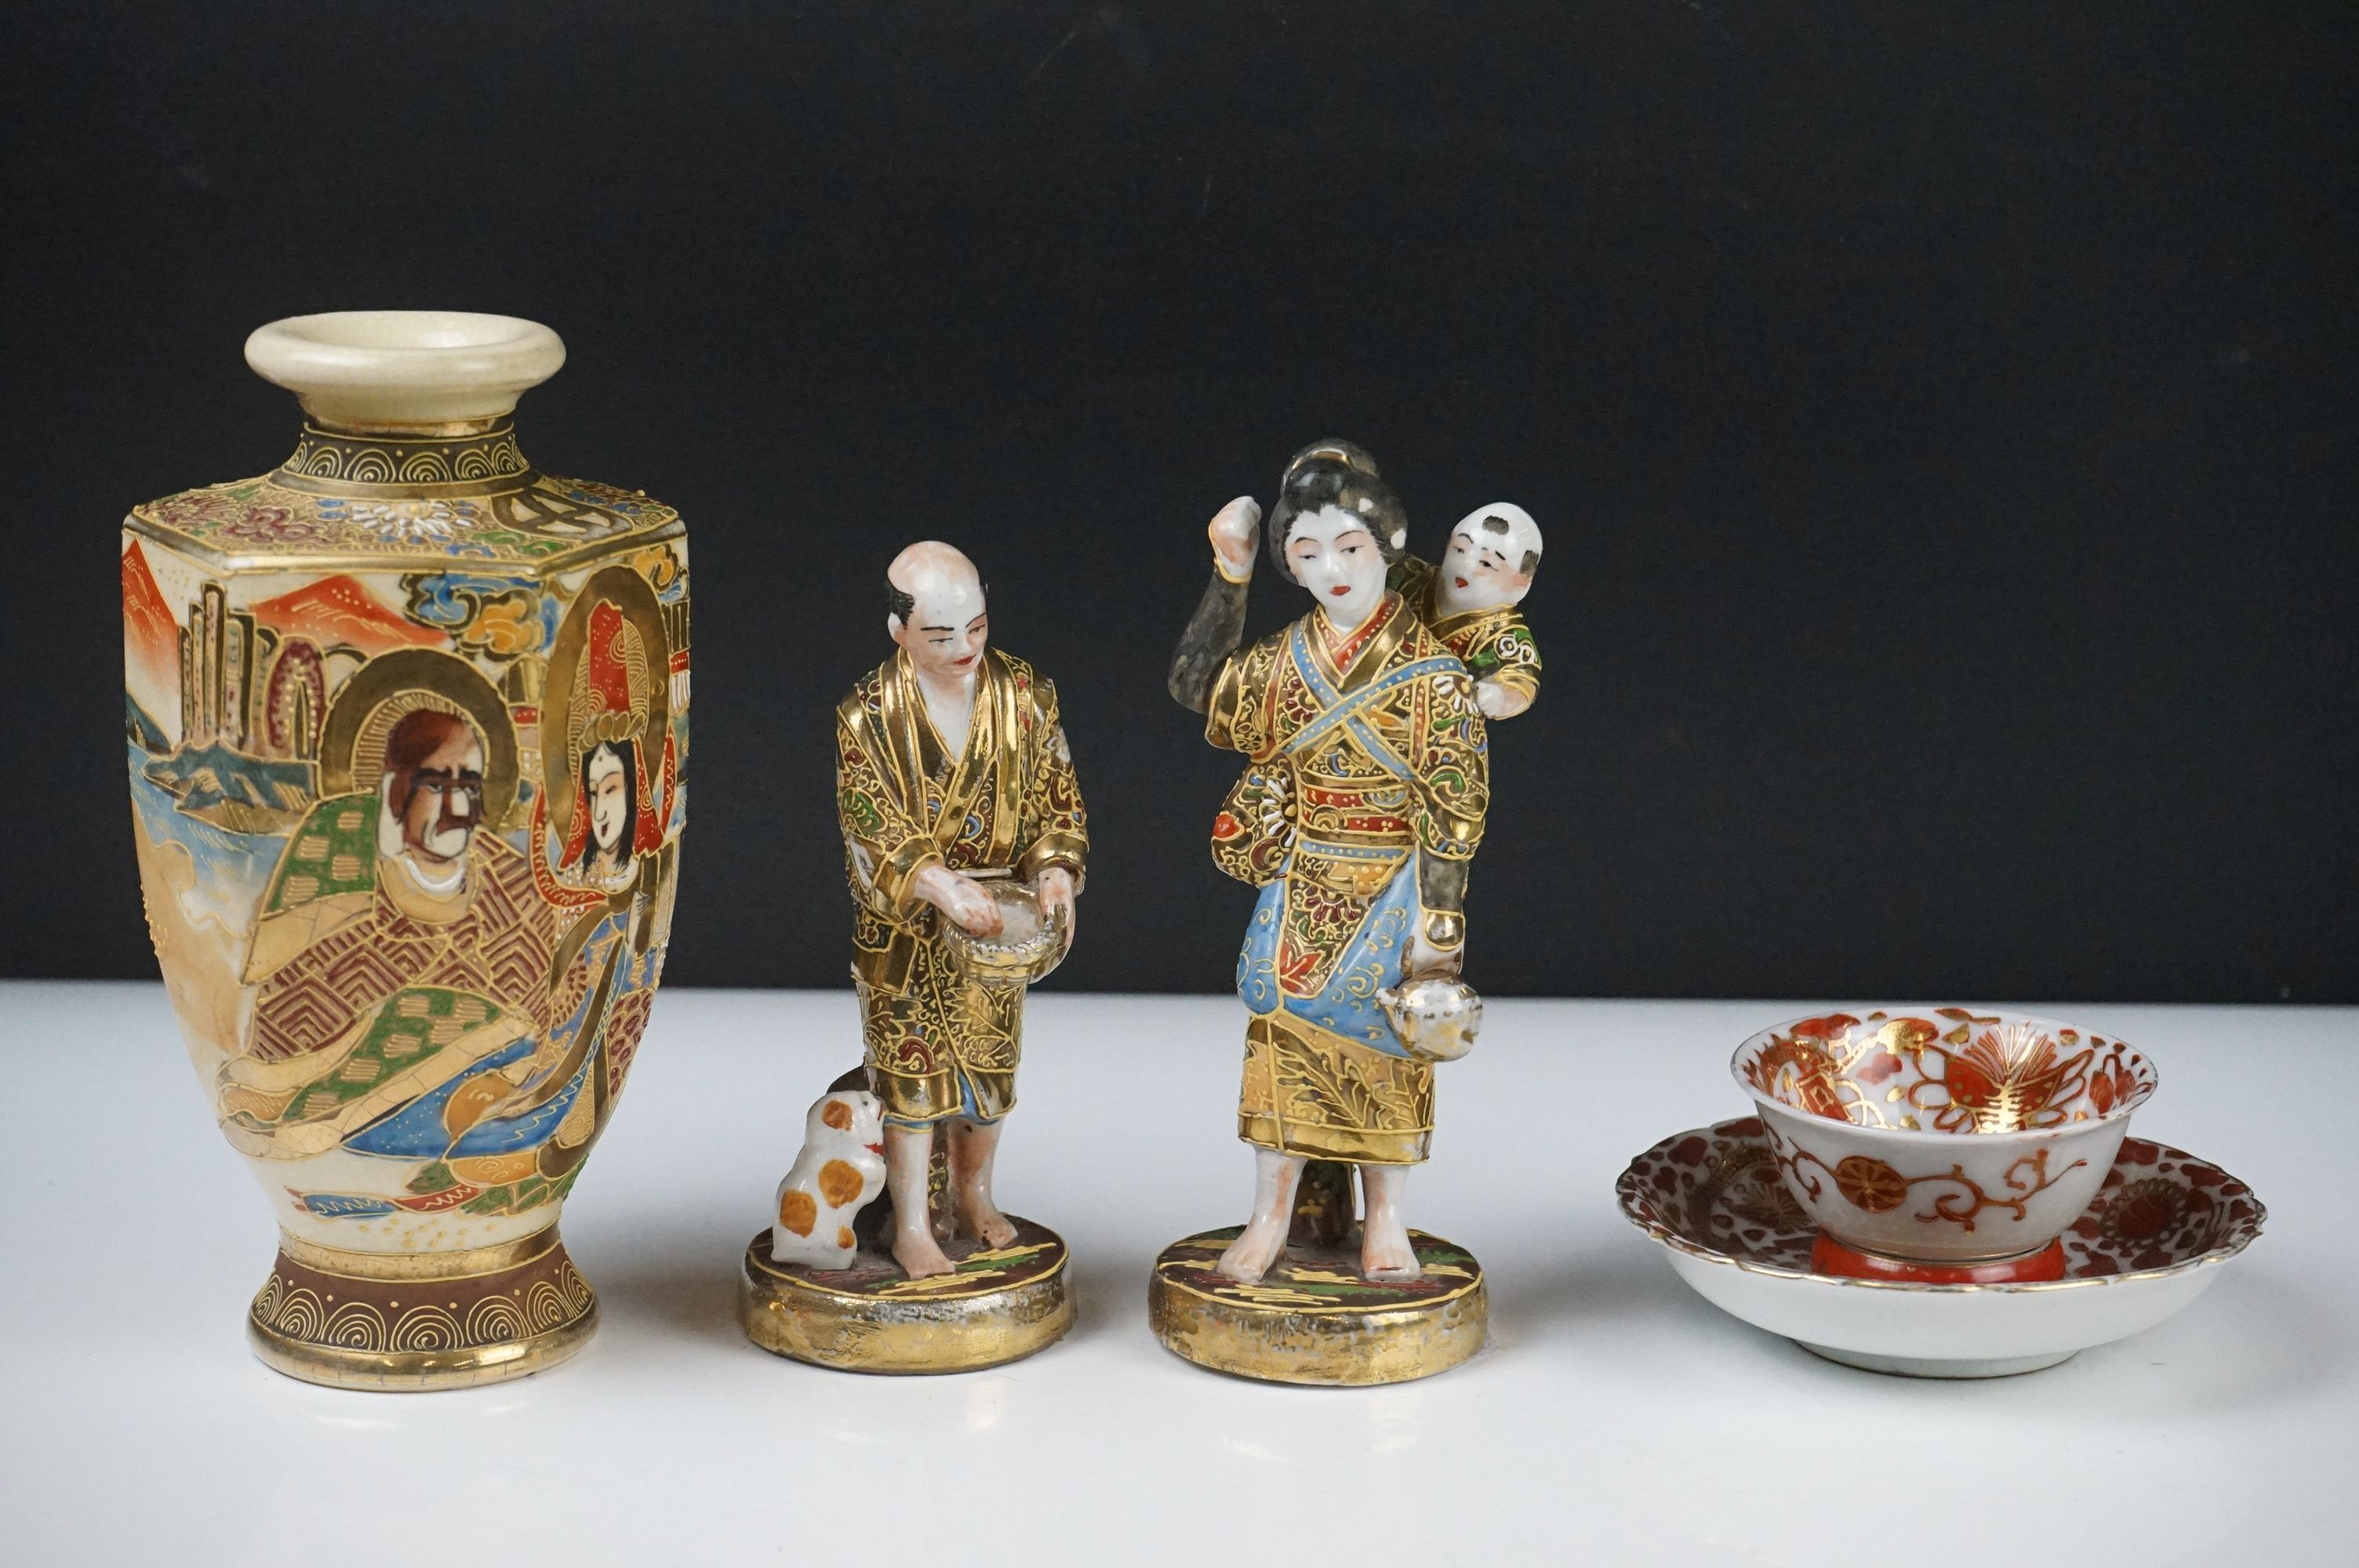 Group of Japanese Ceramics including Satsuma Vase, 16cm high, Two Satsuma Figures and a Small Cup